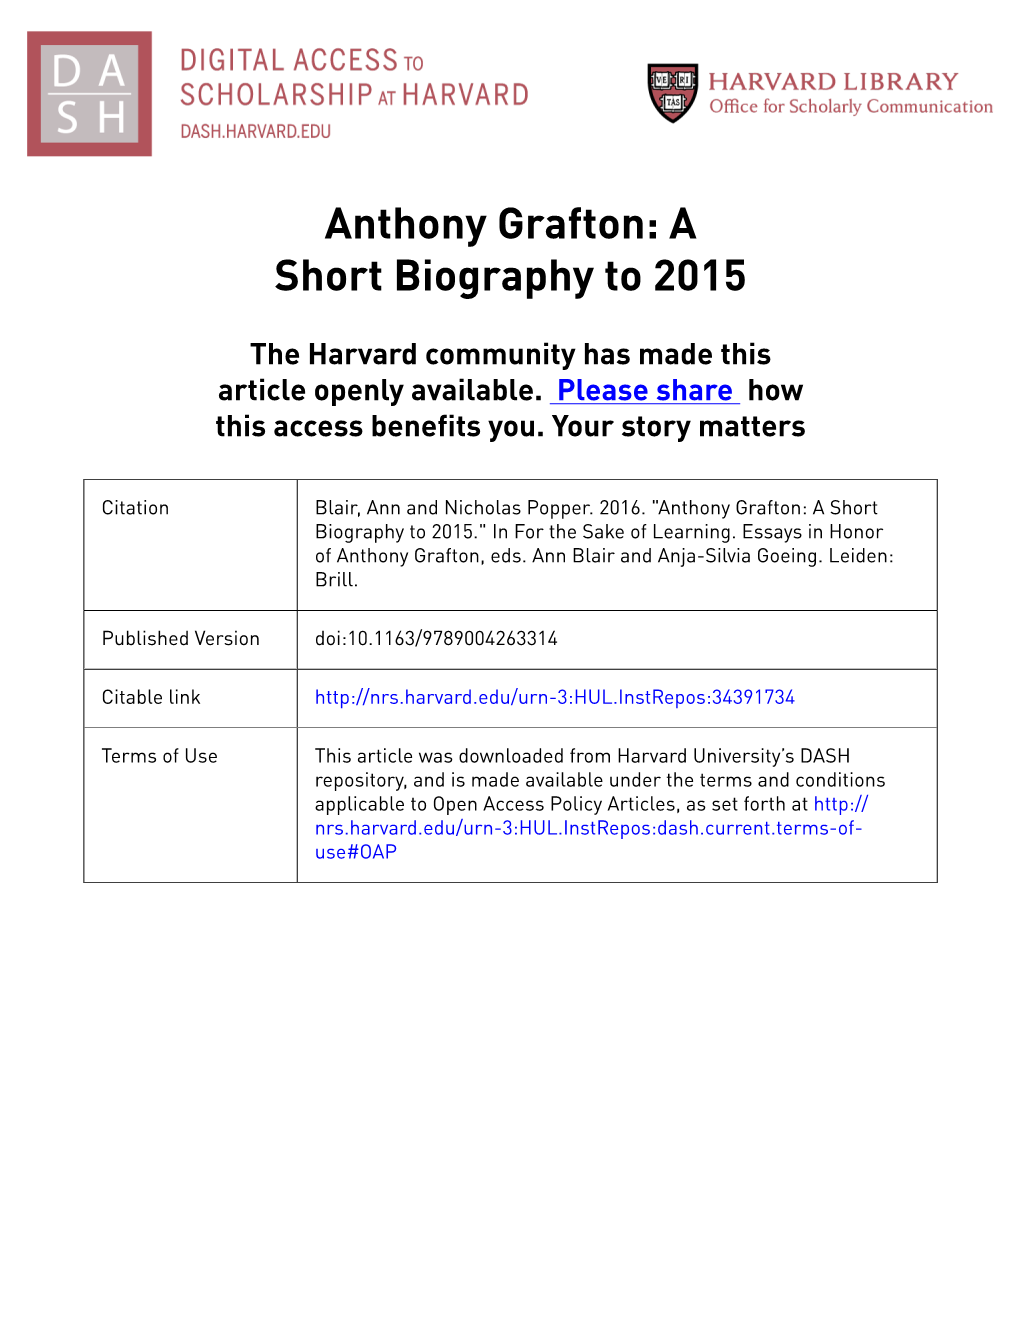 Anthony Grafton: a Short Biography to 2015